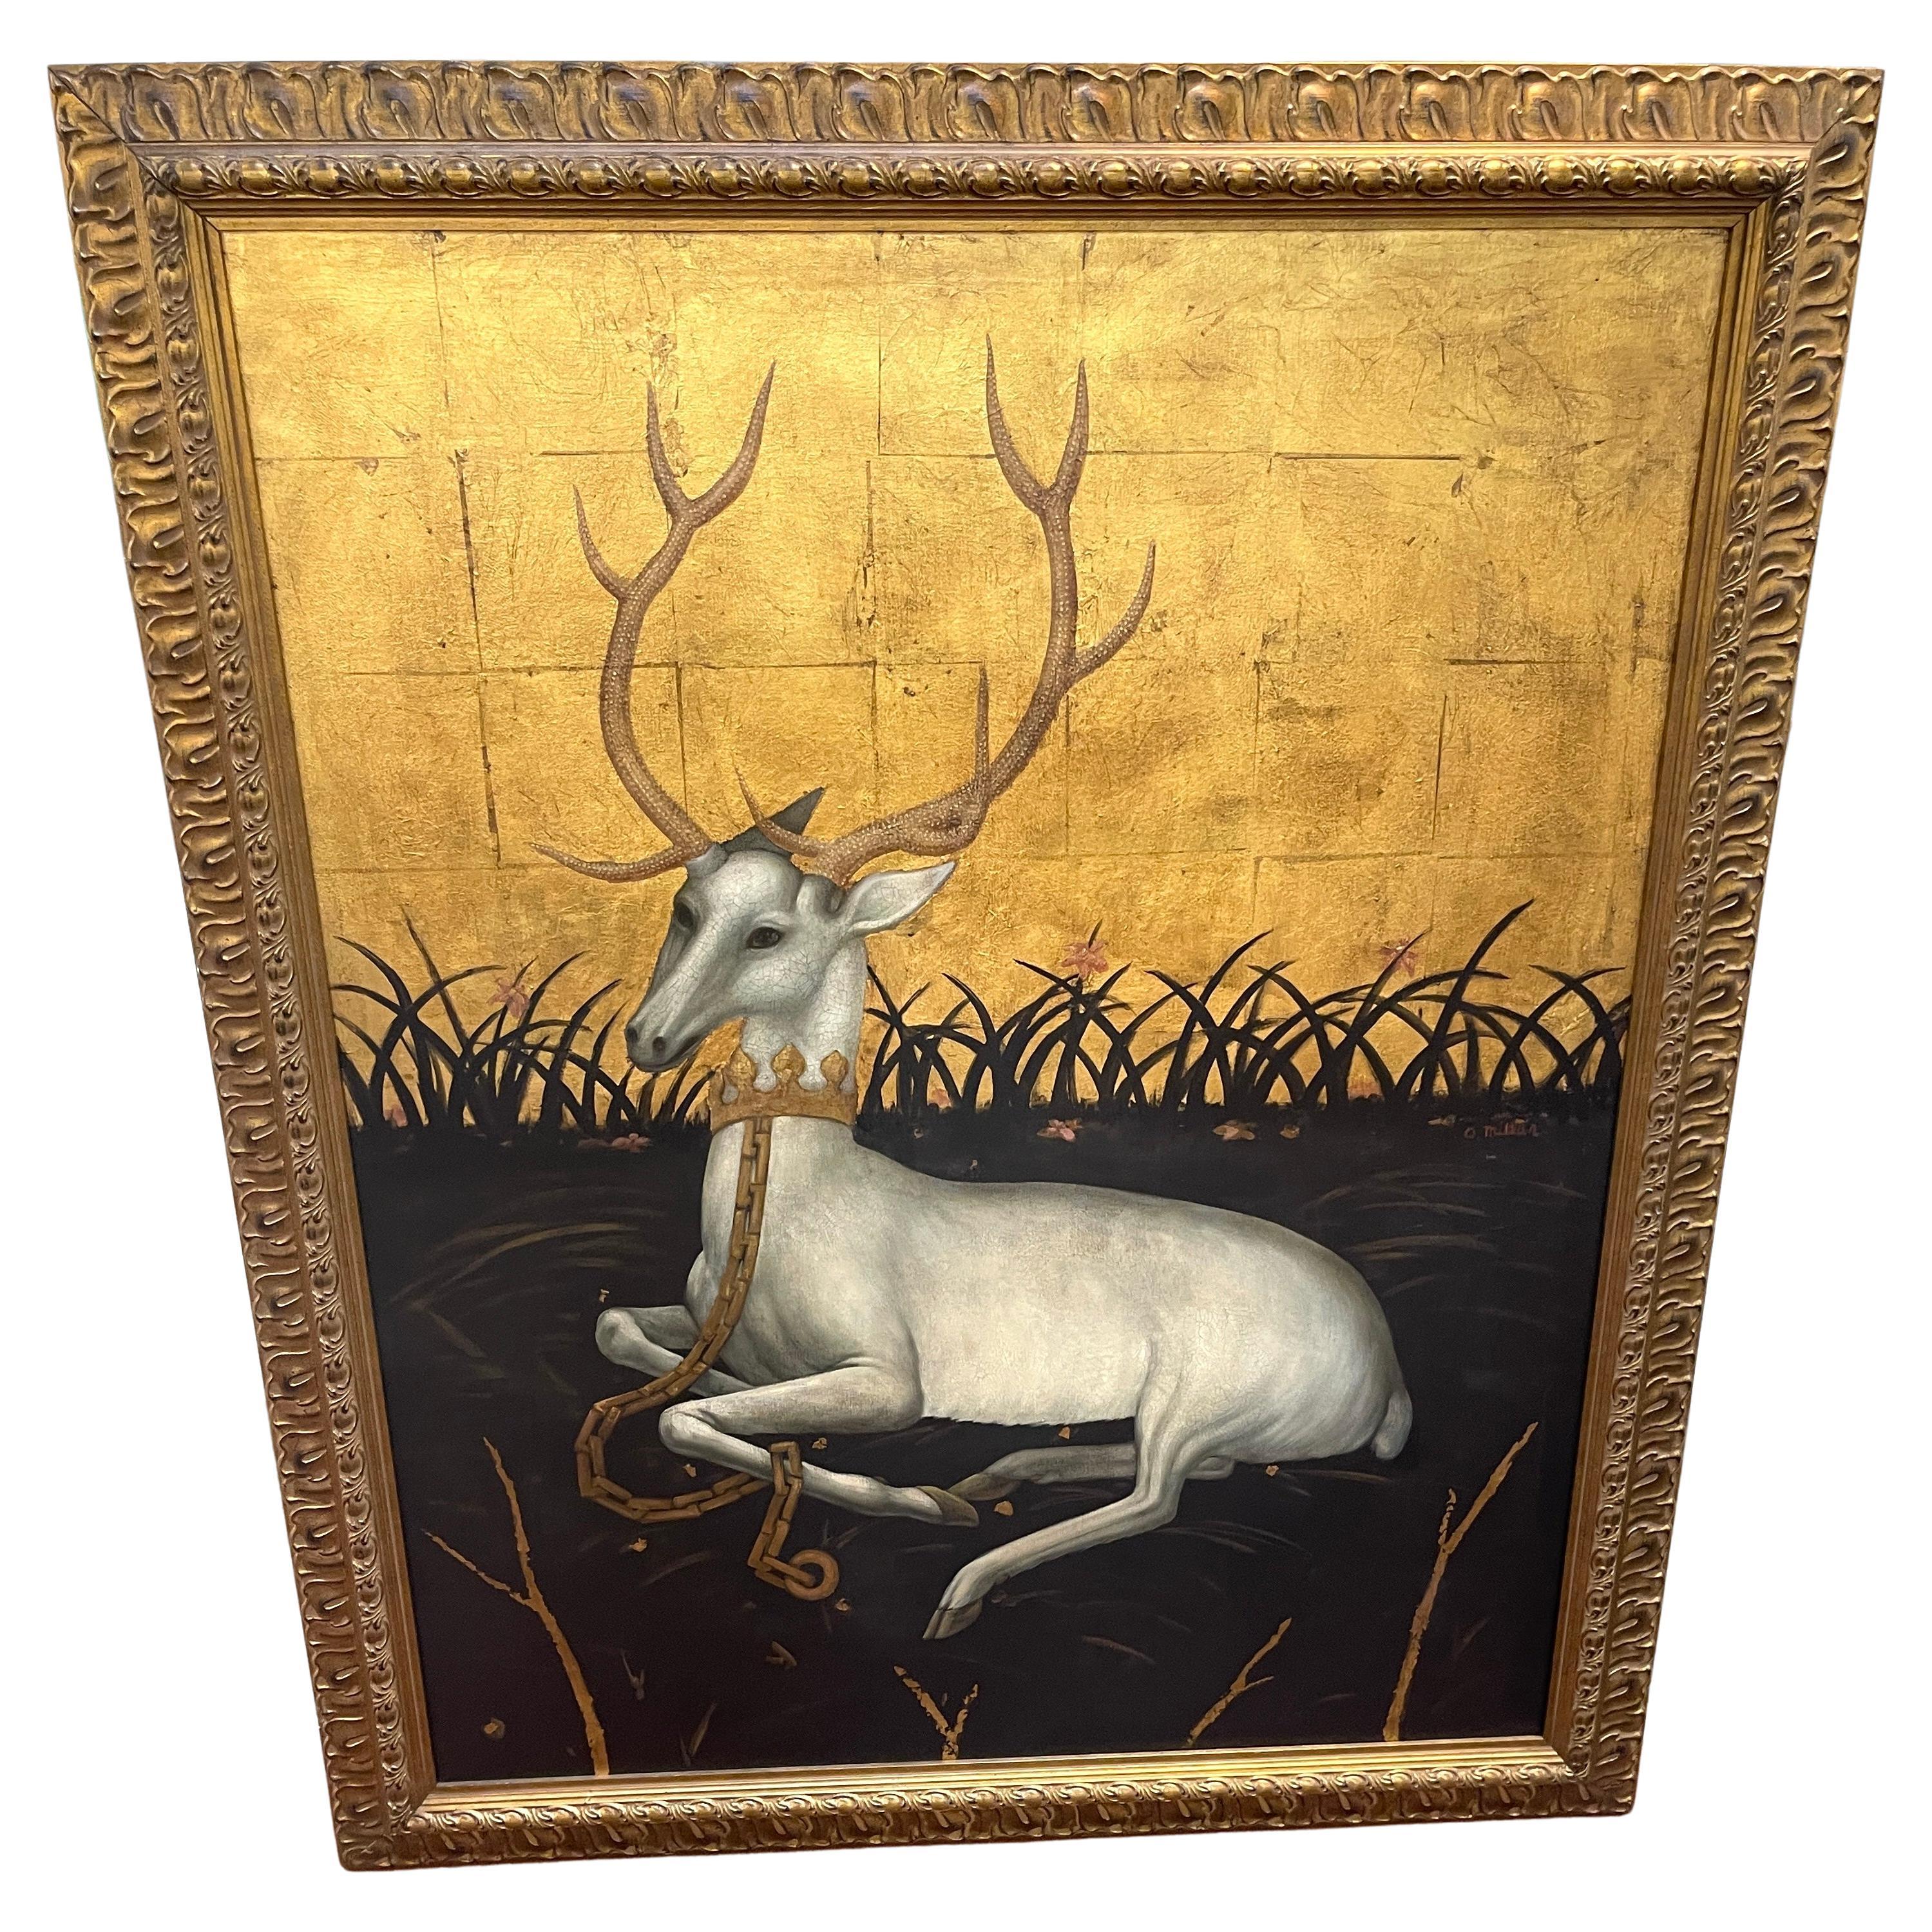 Seated White Deer in Landscape, Signed O. Millar, after Wilton Diptych 
Wilton Diptych Variation, Seated White Deer in Landscape, Signed O. Millar
Oil on canvas, 40 inches by 50 inches
Giltwood Framed 47 inches wide by 58 inches high 

An enchanting